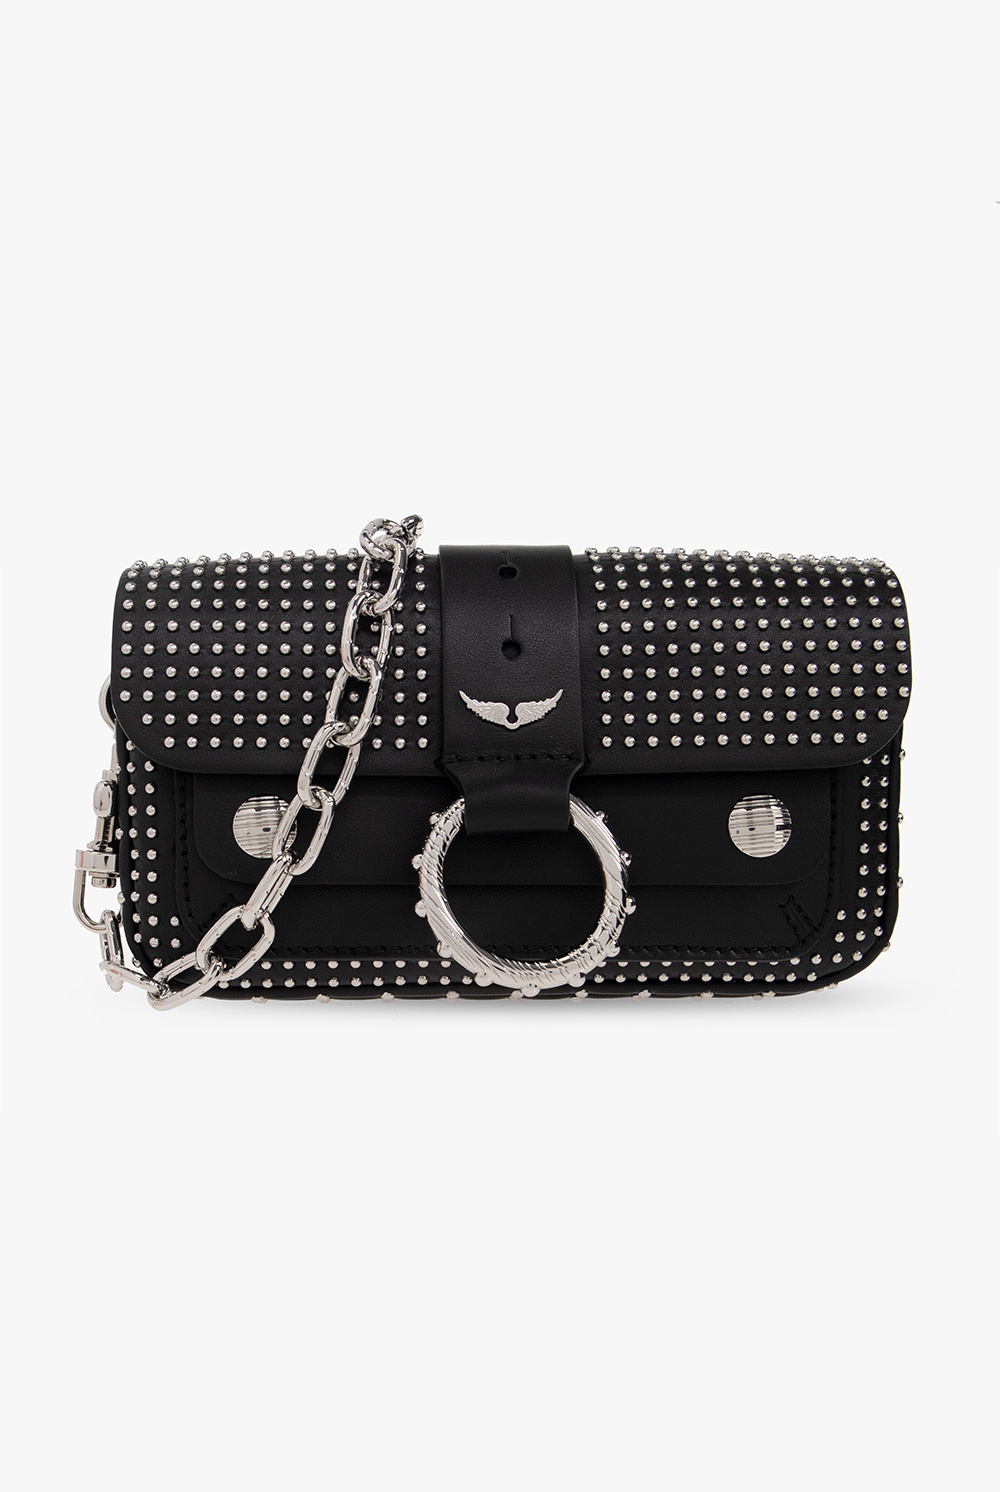 Zadig Voltaire Bag Kate New Black Patent Leather Crossbody Metal  Chain/Elements